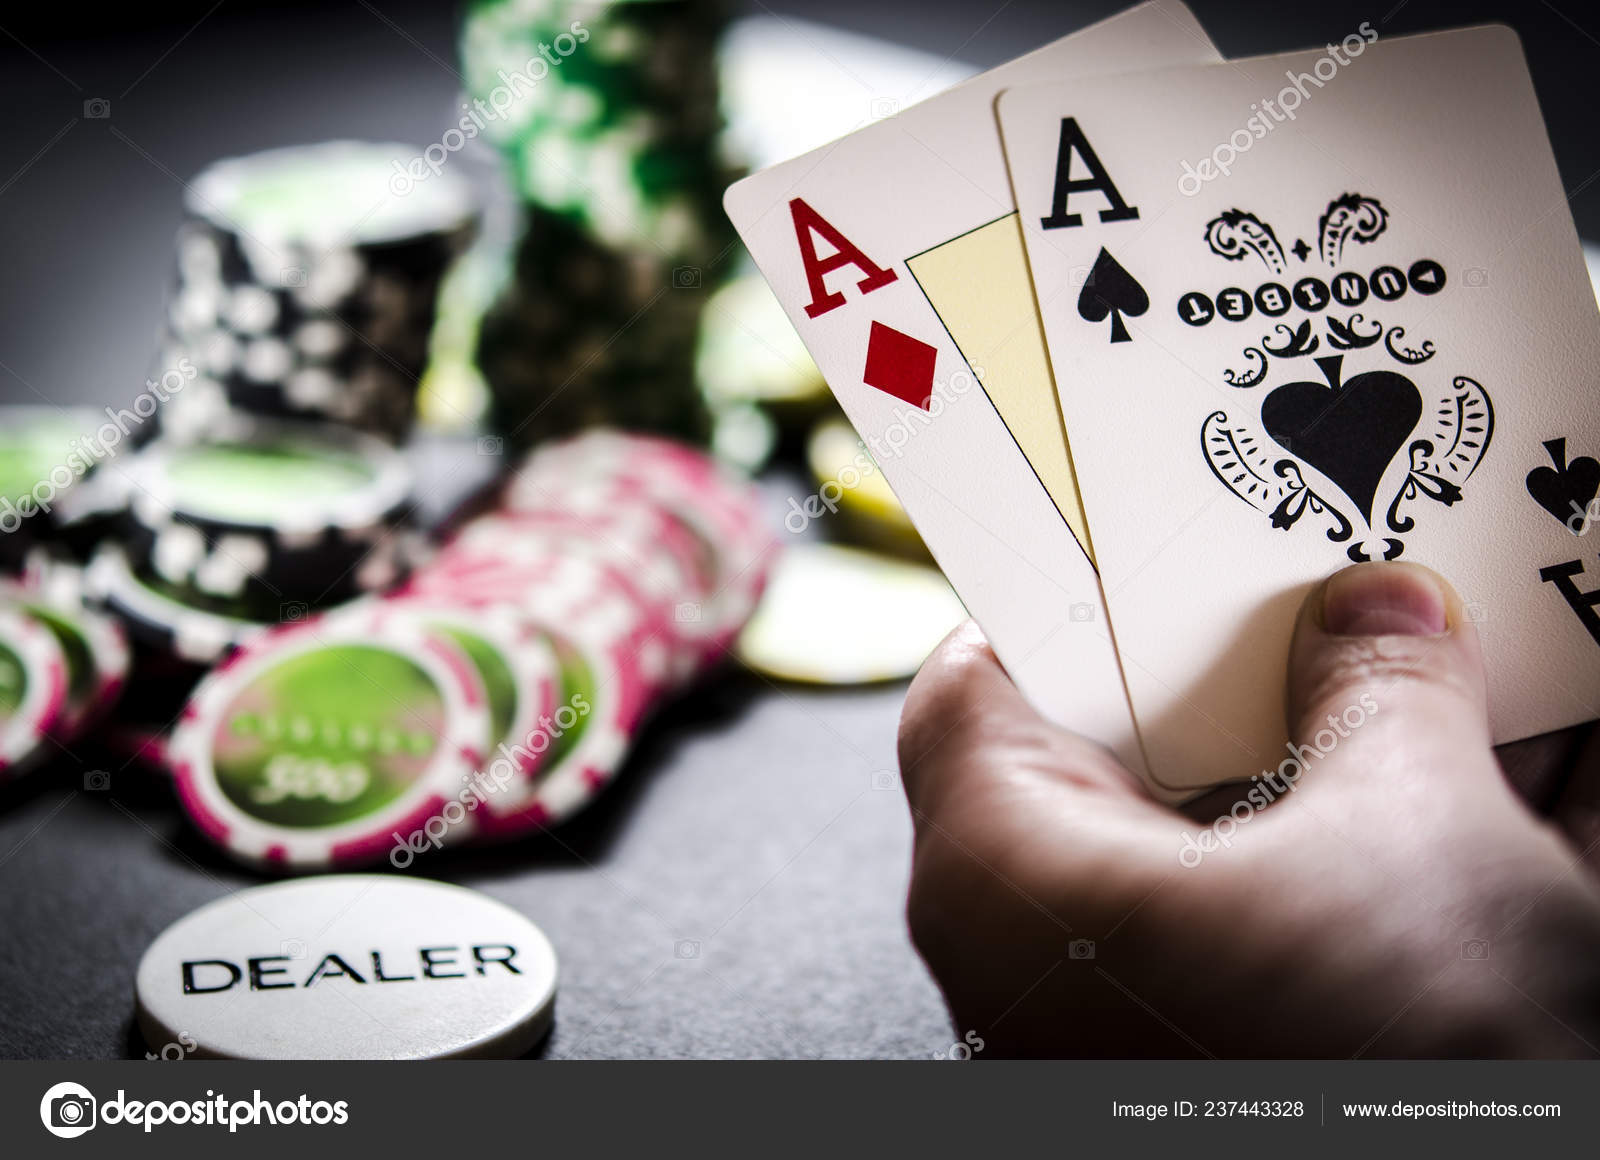 Black Table Poker Chips Cards Chip Hand – Stock Photo © yankovets@gmail.com #237443328